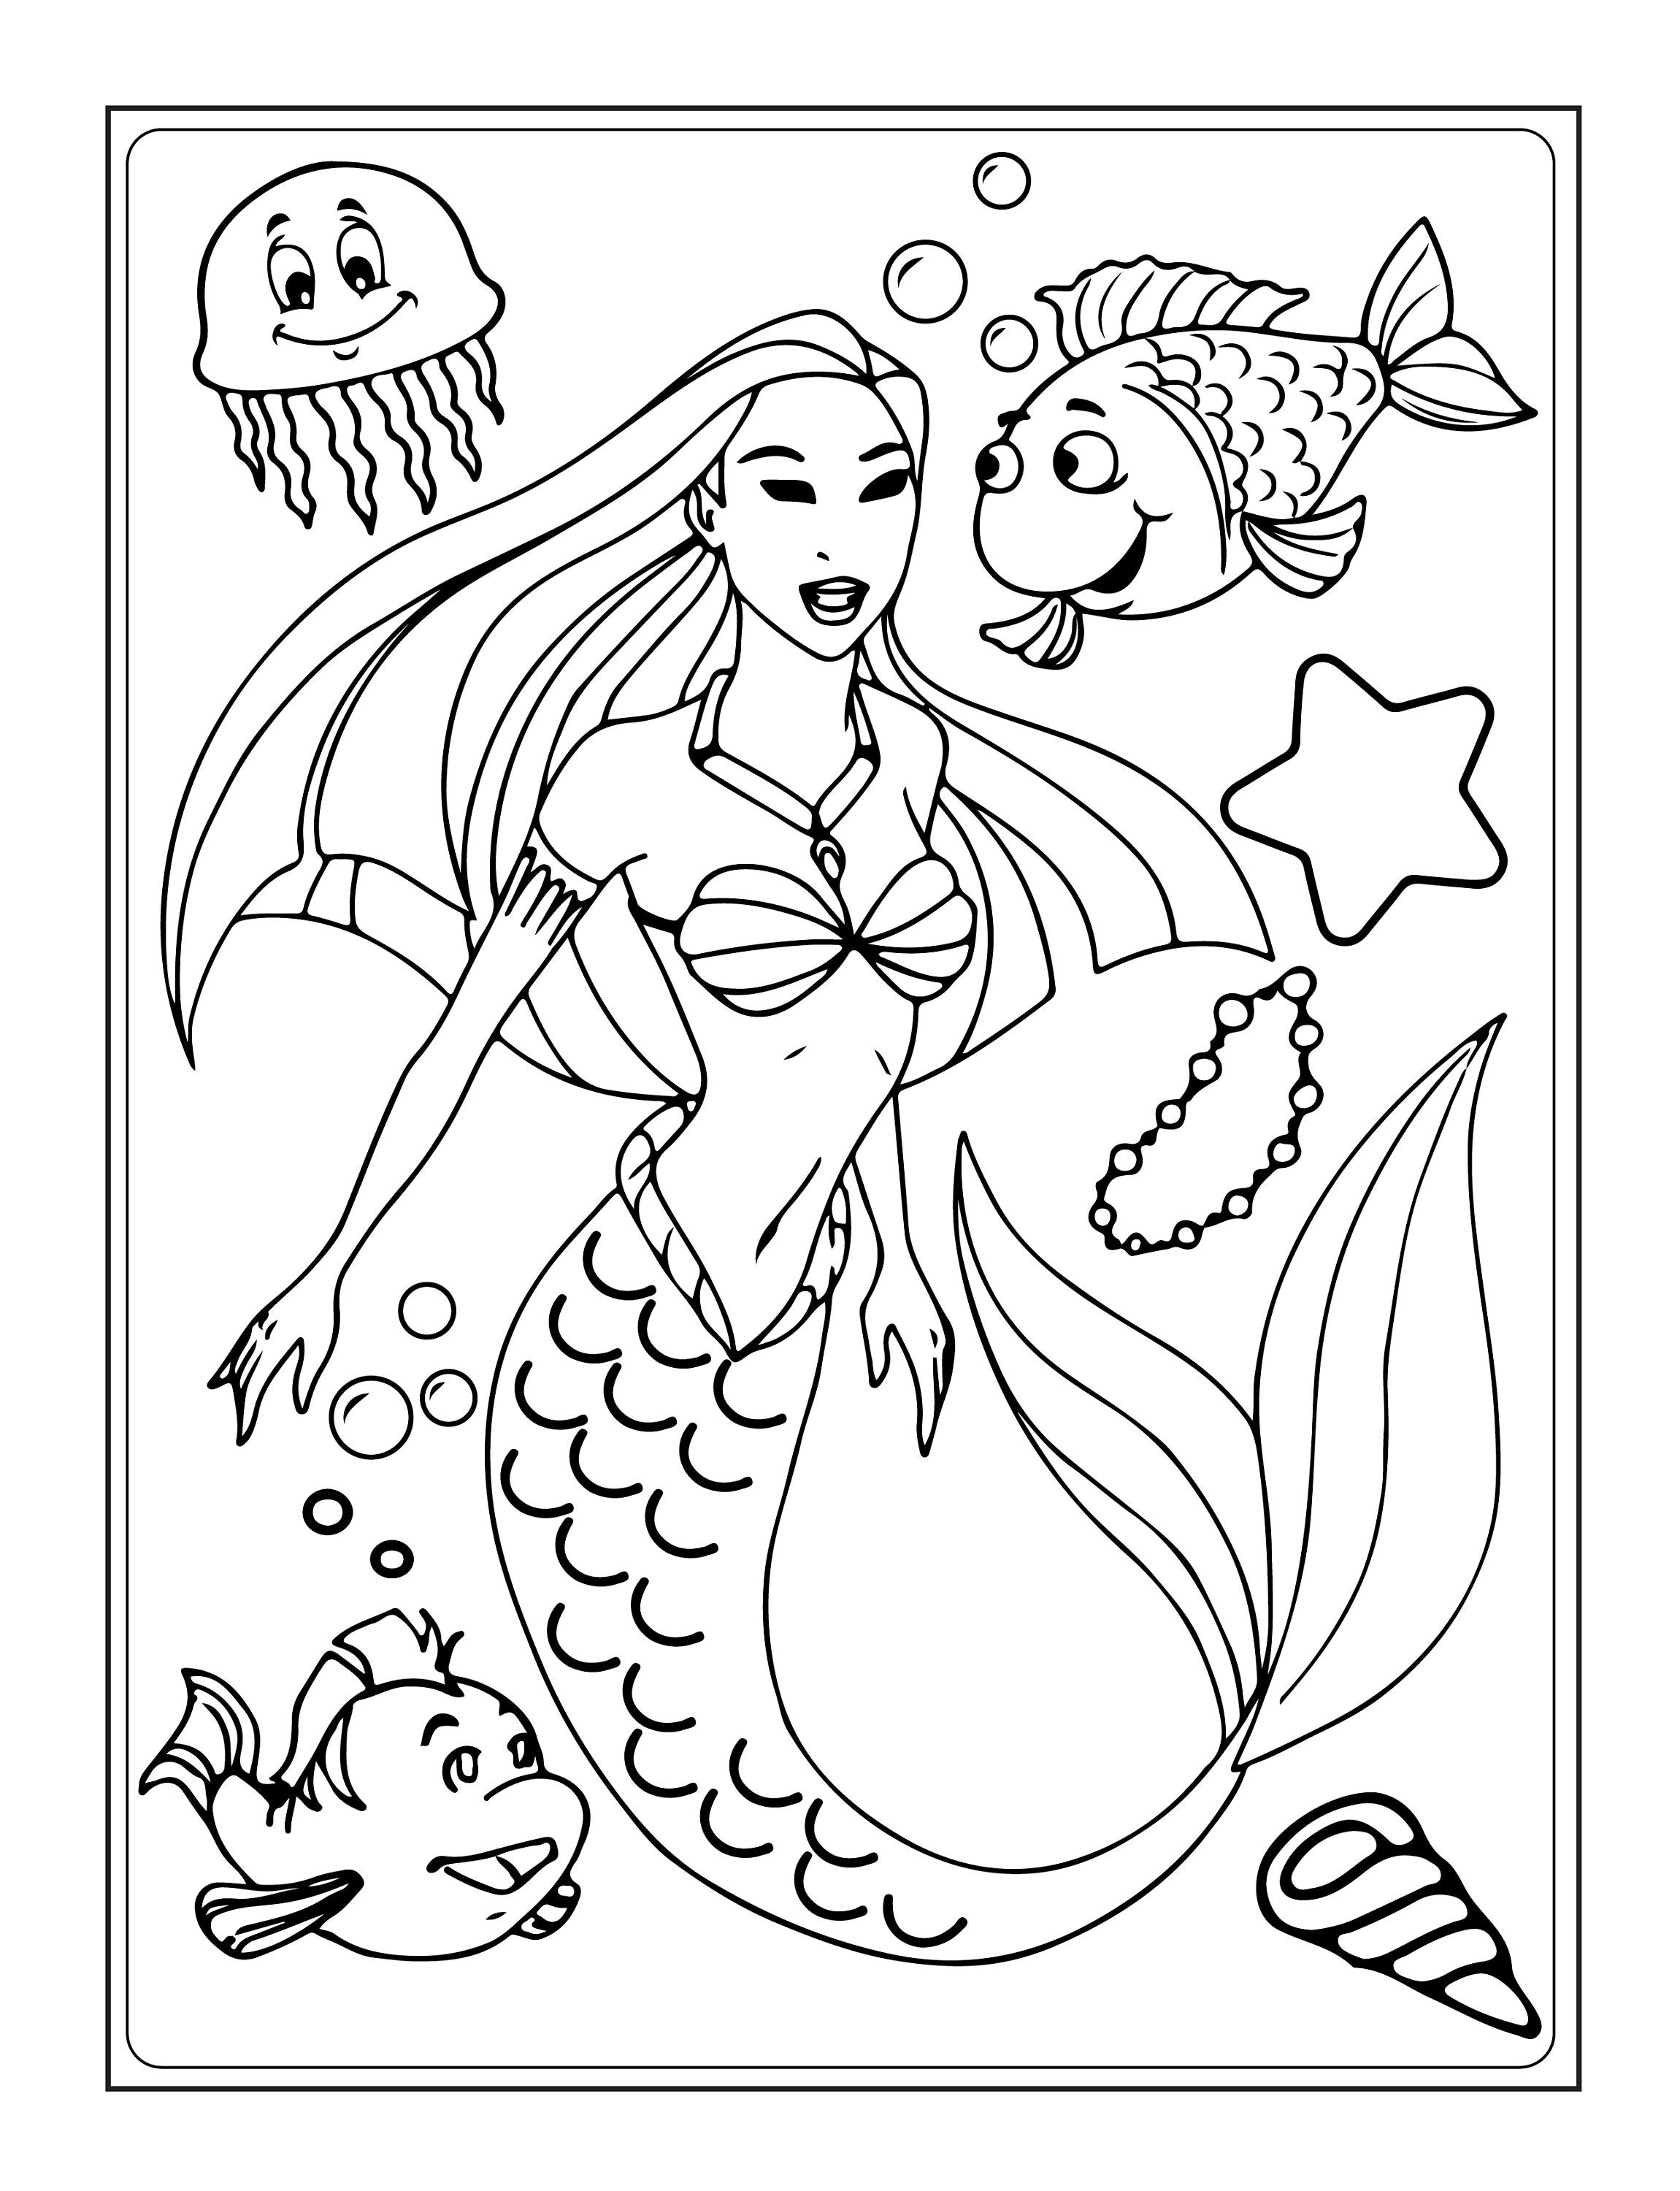 100 Disney Animals Adult Colouring Book French Mystery by Number Puzzel  Mermaid